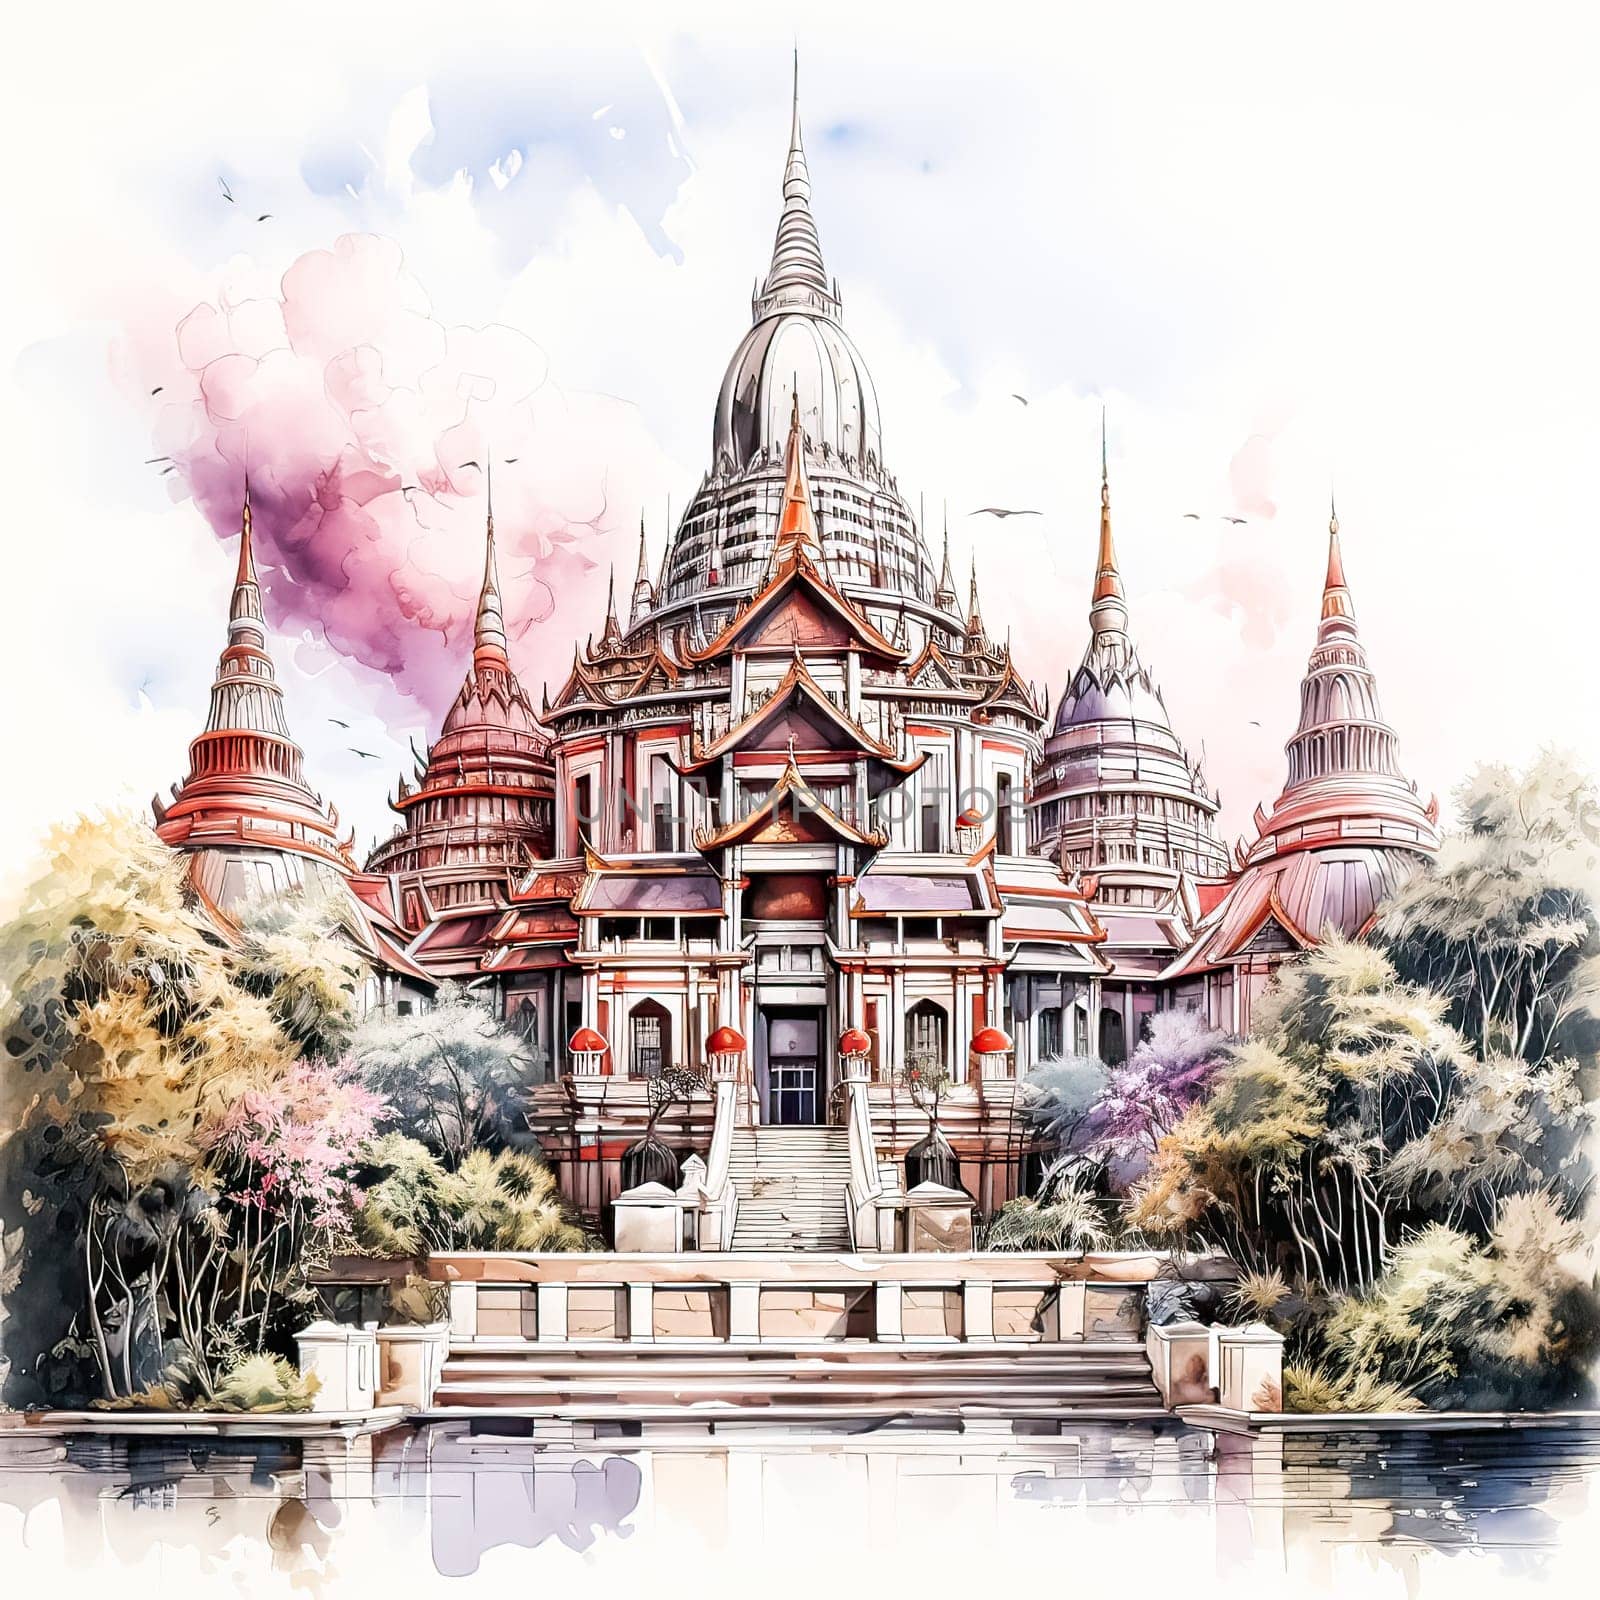 Sketch in watercolor liners celebrates the serene beauty of an ancient Thai style temple by Alla_Morozova93